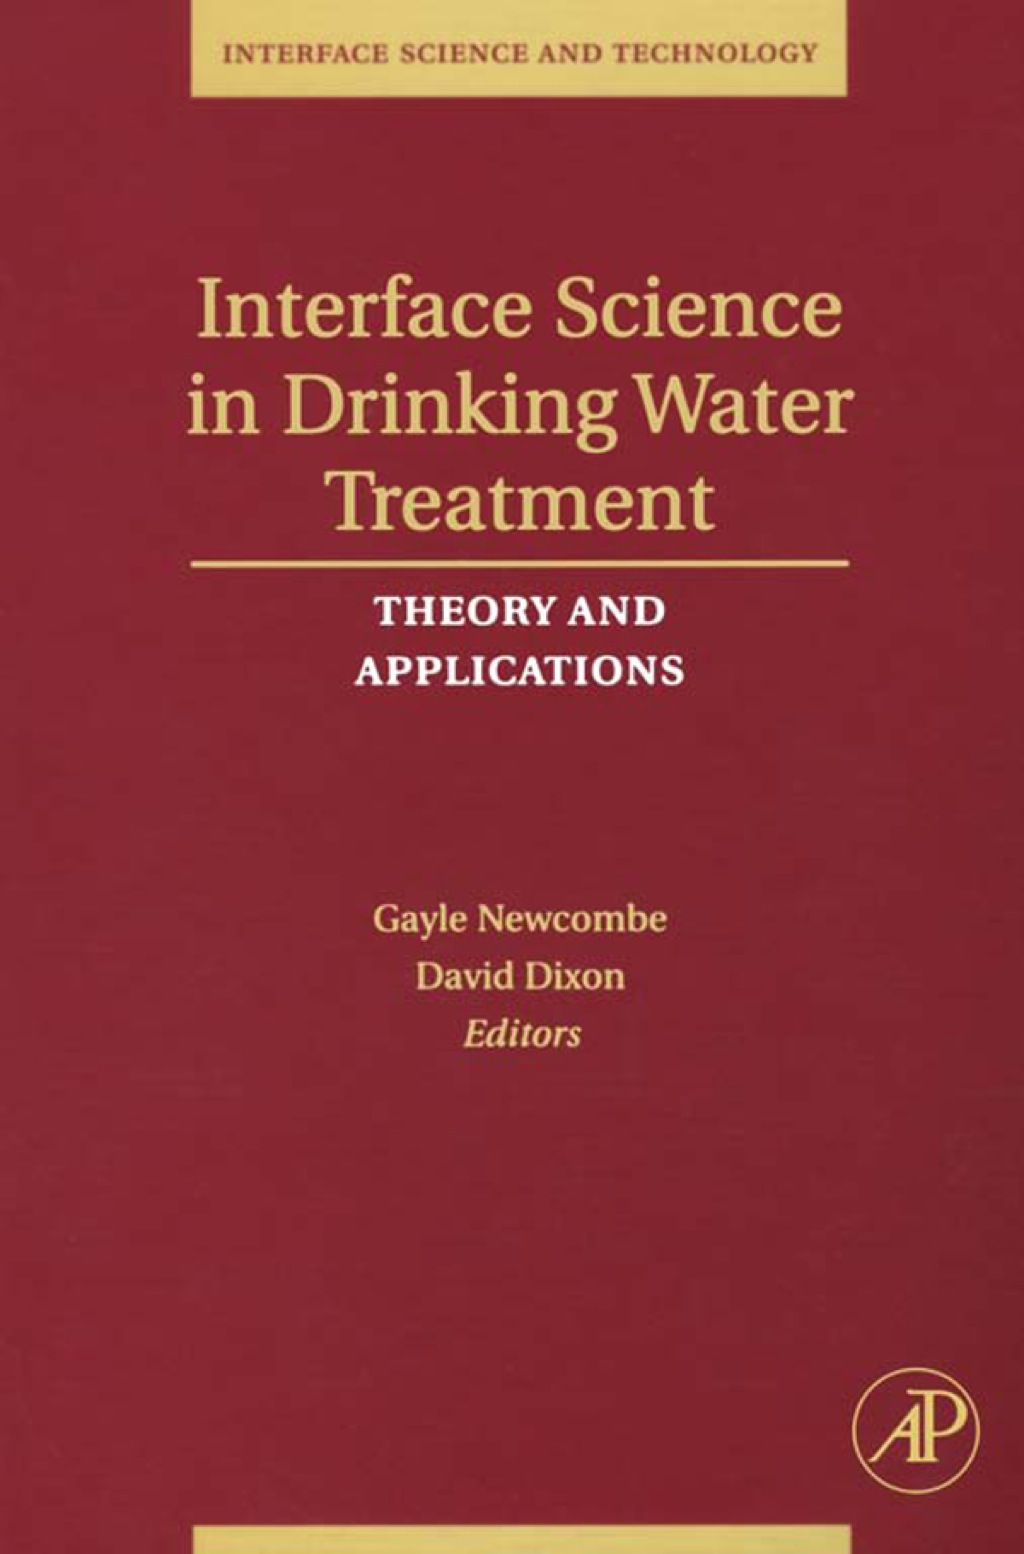 Interface Science in Drinking Water Treatment (eBook) - Gayle Newcombe